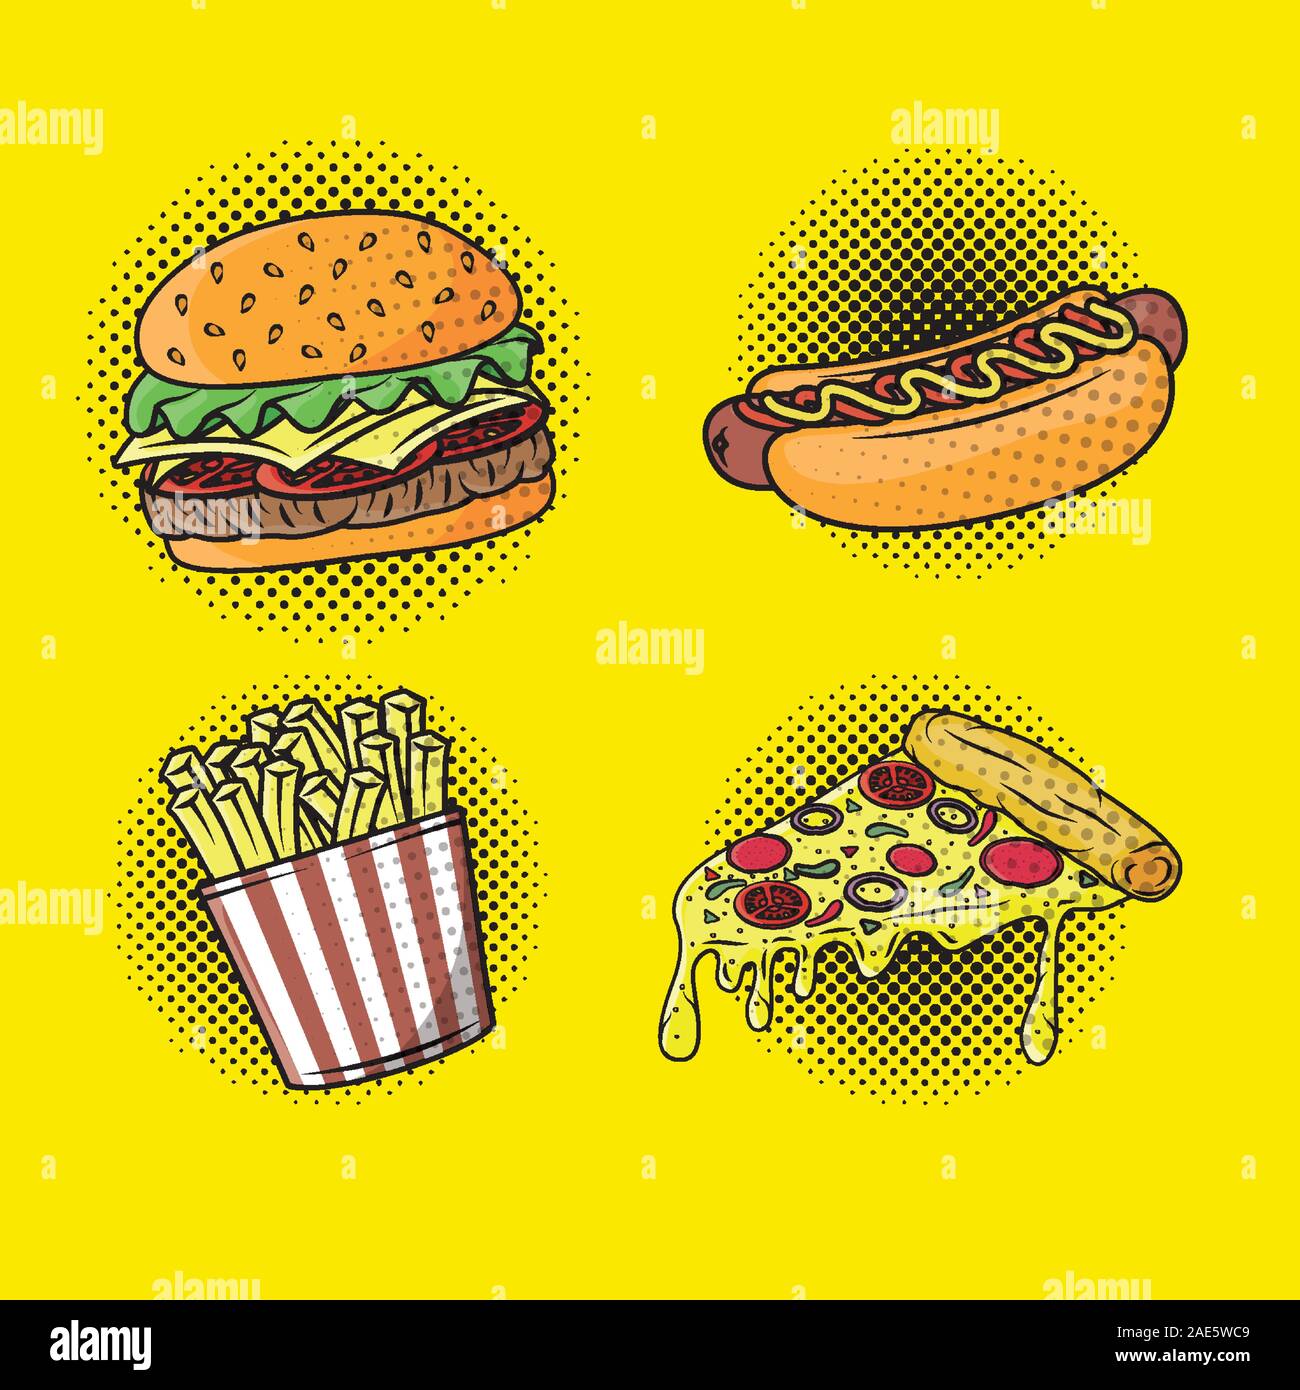 Fast Food Pop Art High Resolution Stock Photography and Images - Alamy